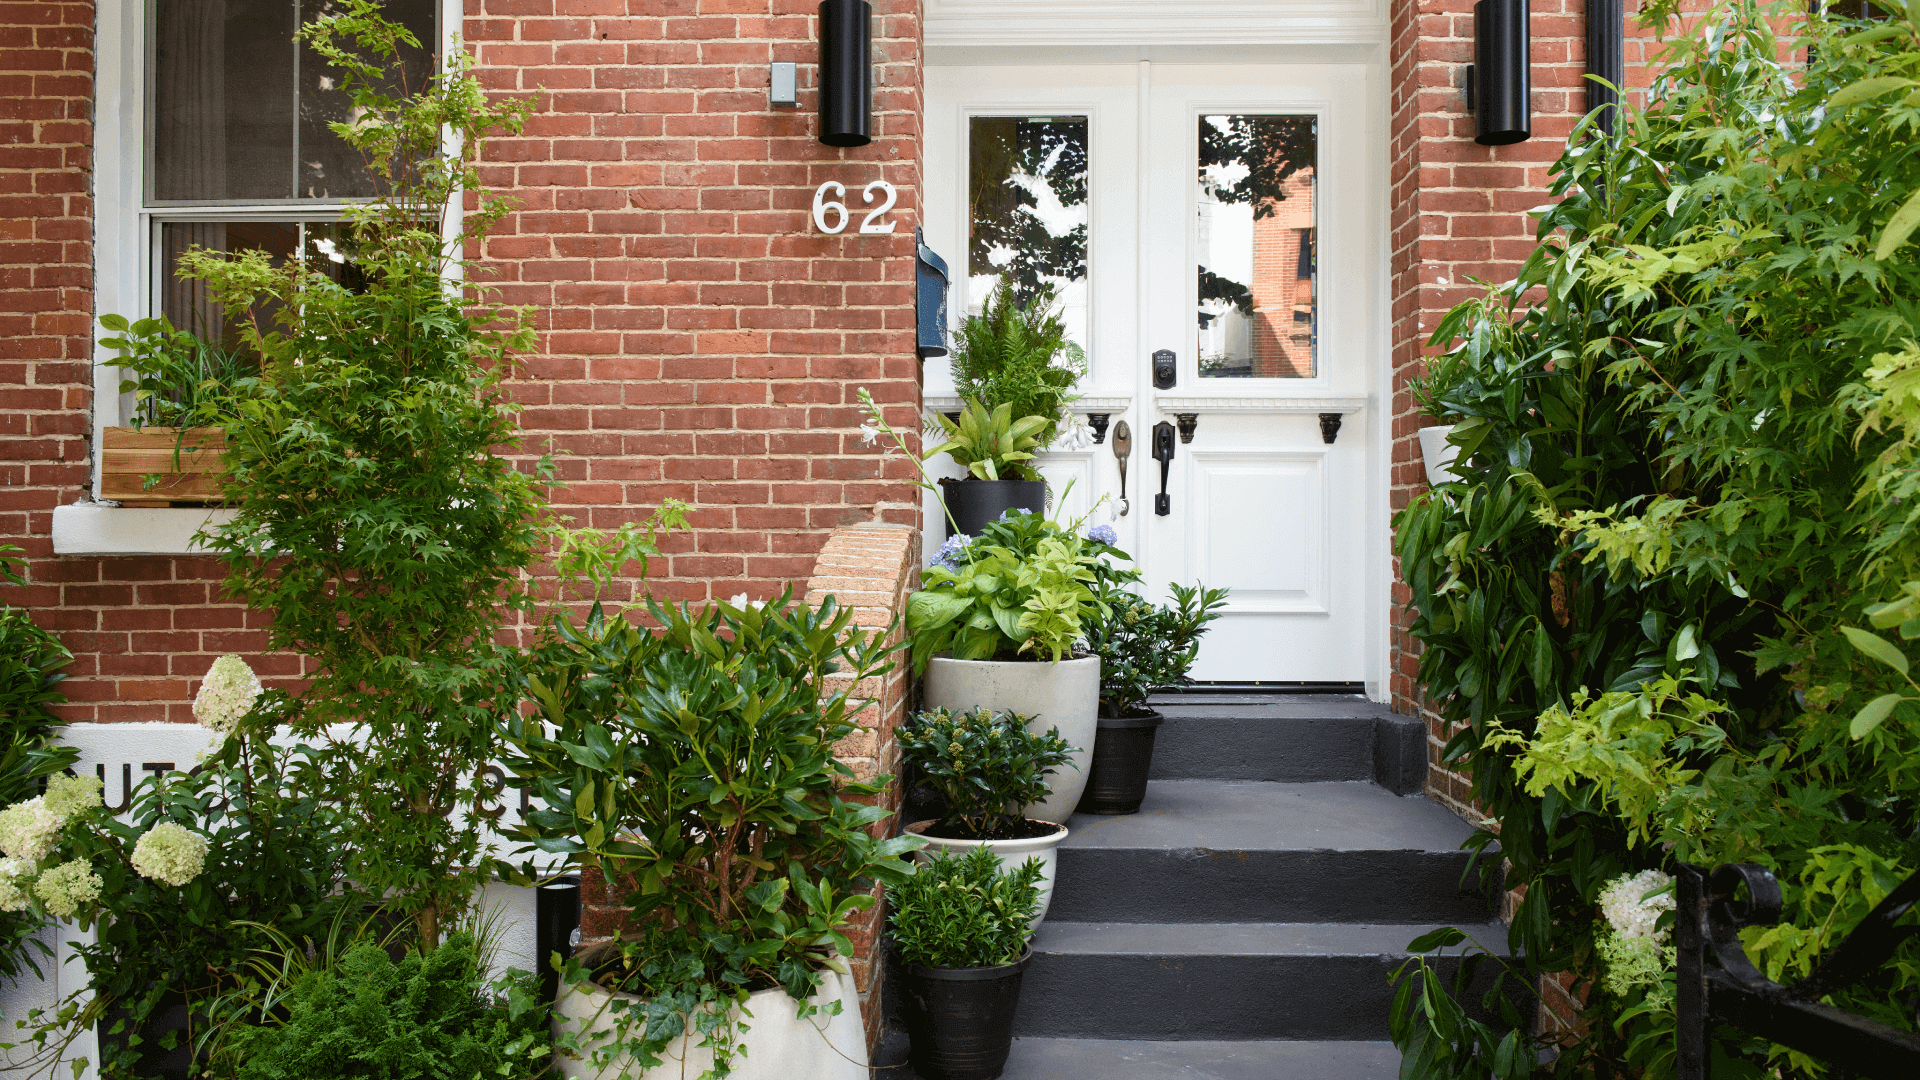 view of entry and front garden of a brick house with number 62 on it, a gray stoop lined with potted plants leads to a white windowed door, flanked by green tress and bushes